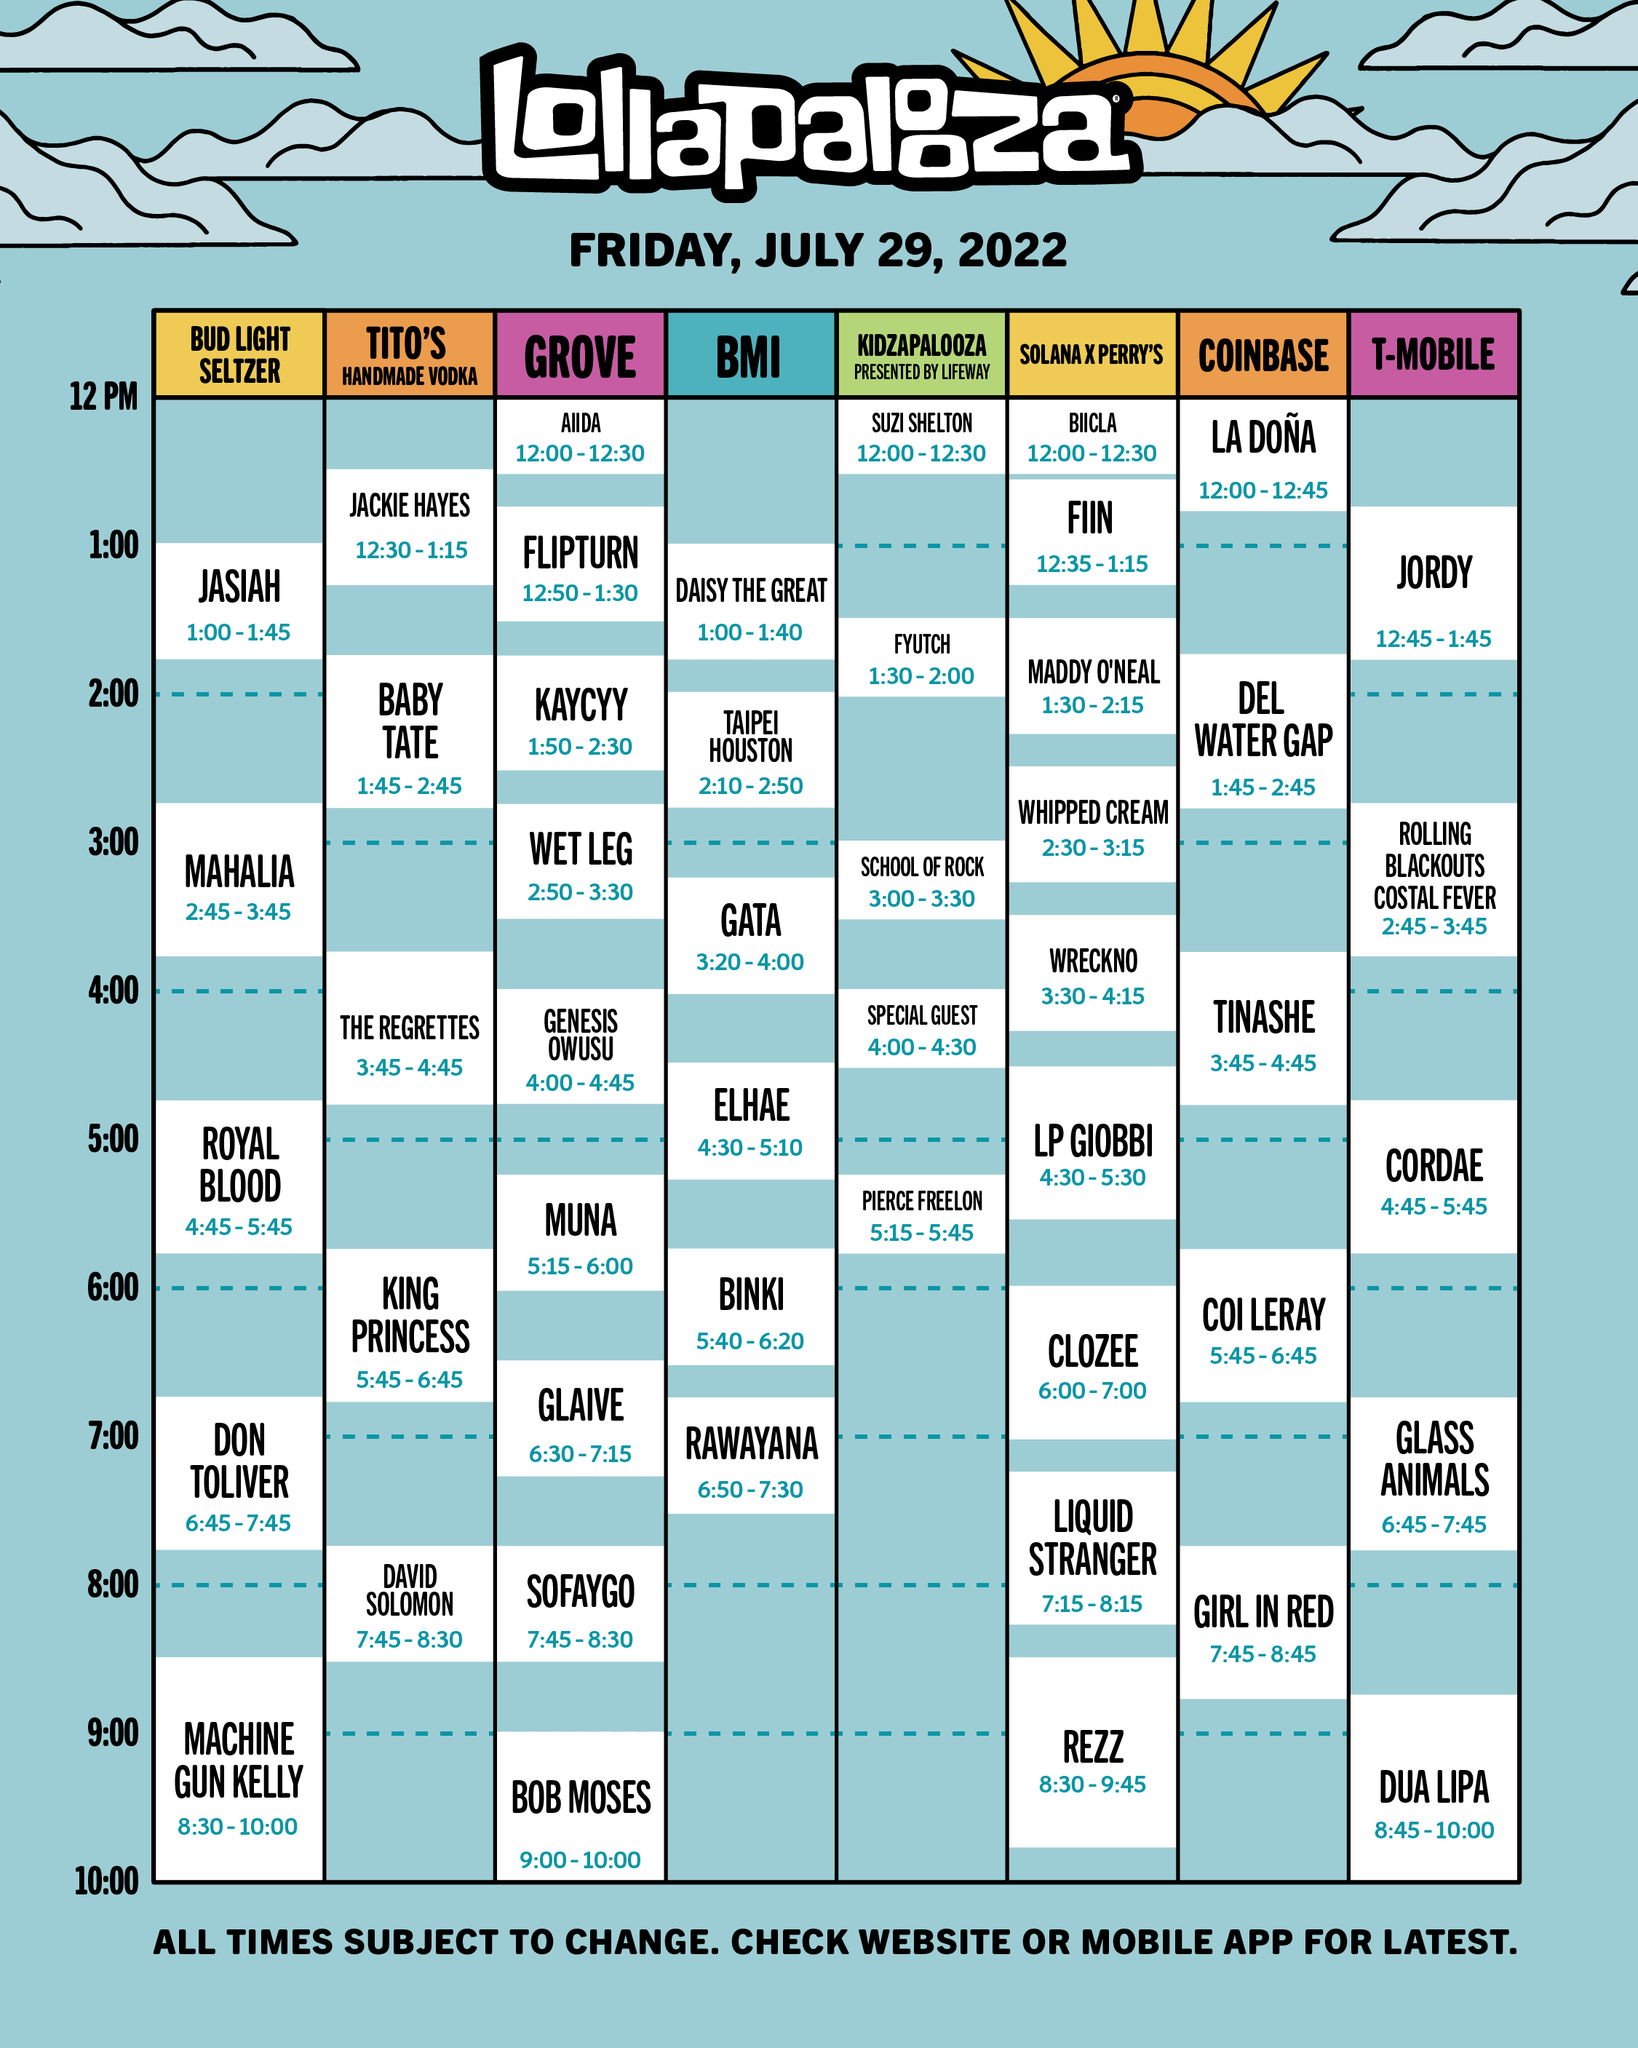 Lollapalooza 2022 Releases Daily Schedule - Pursuit Of Dopeness